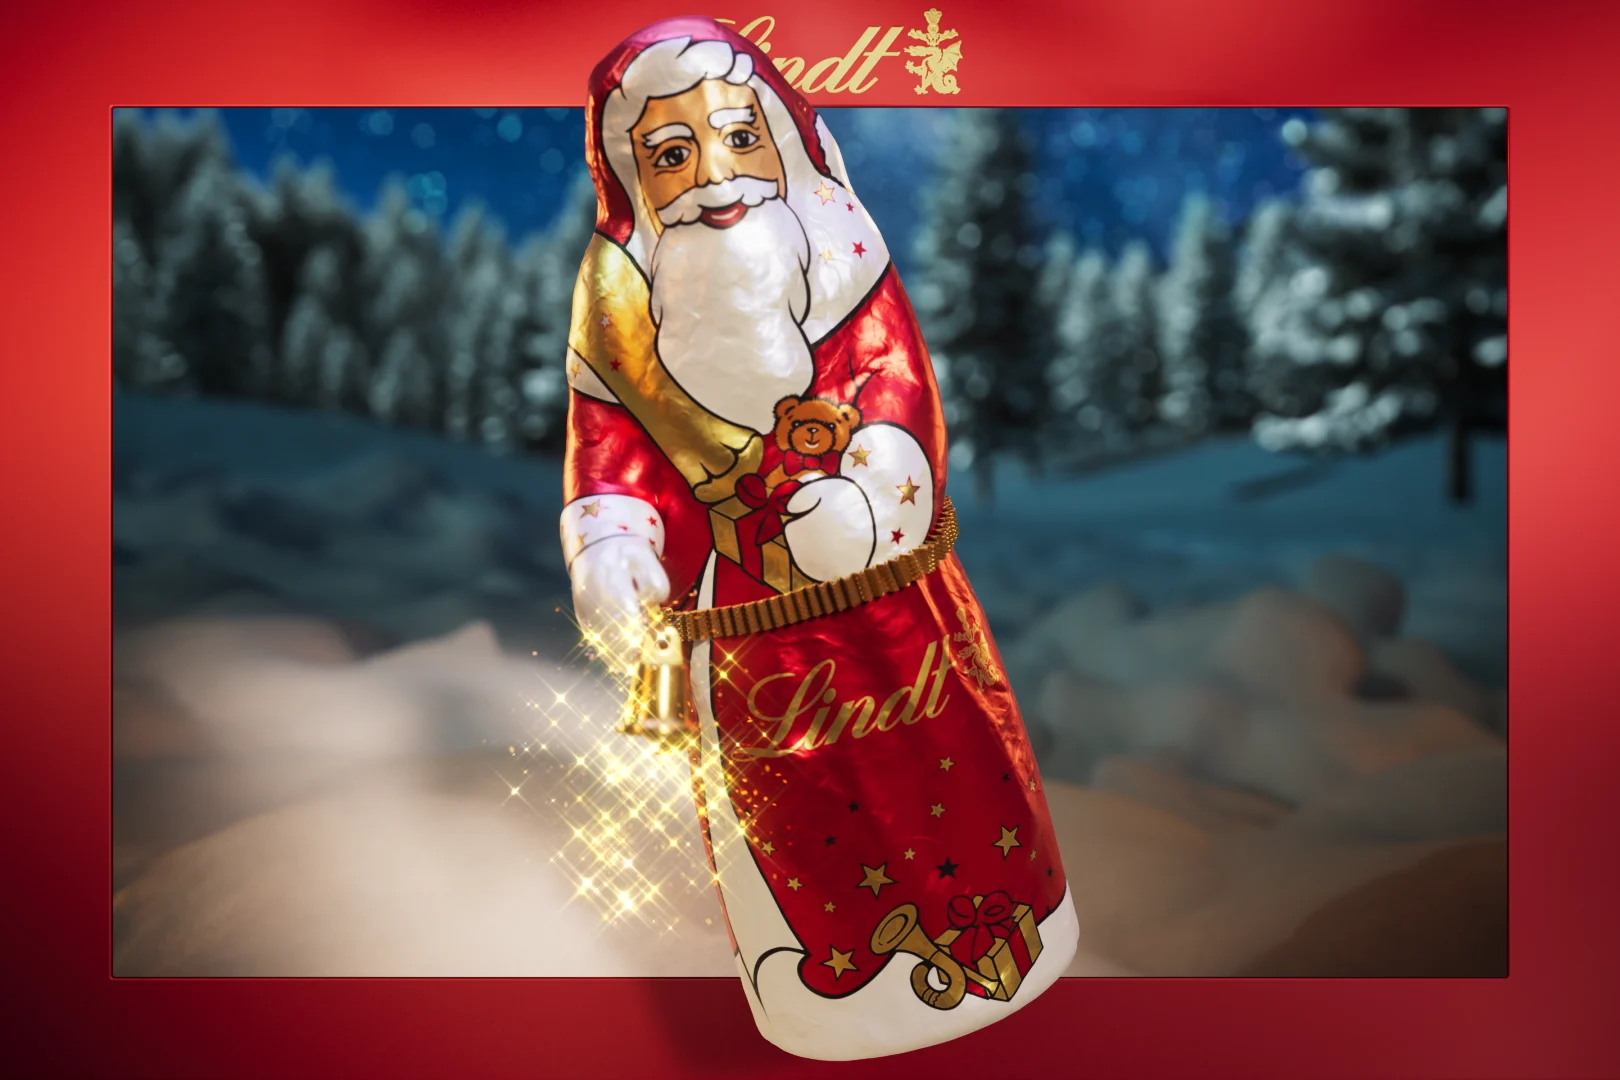 we see a chocolate Santa Claus coming out of a picture with a red frame